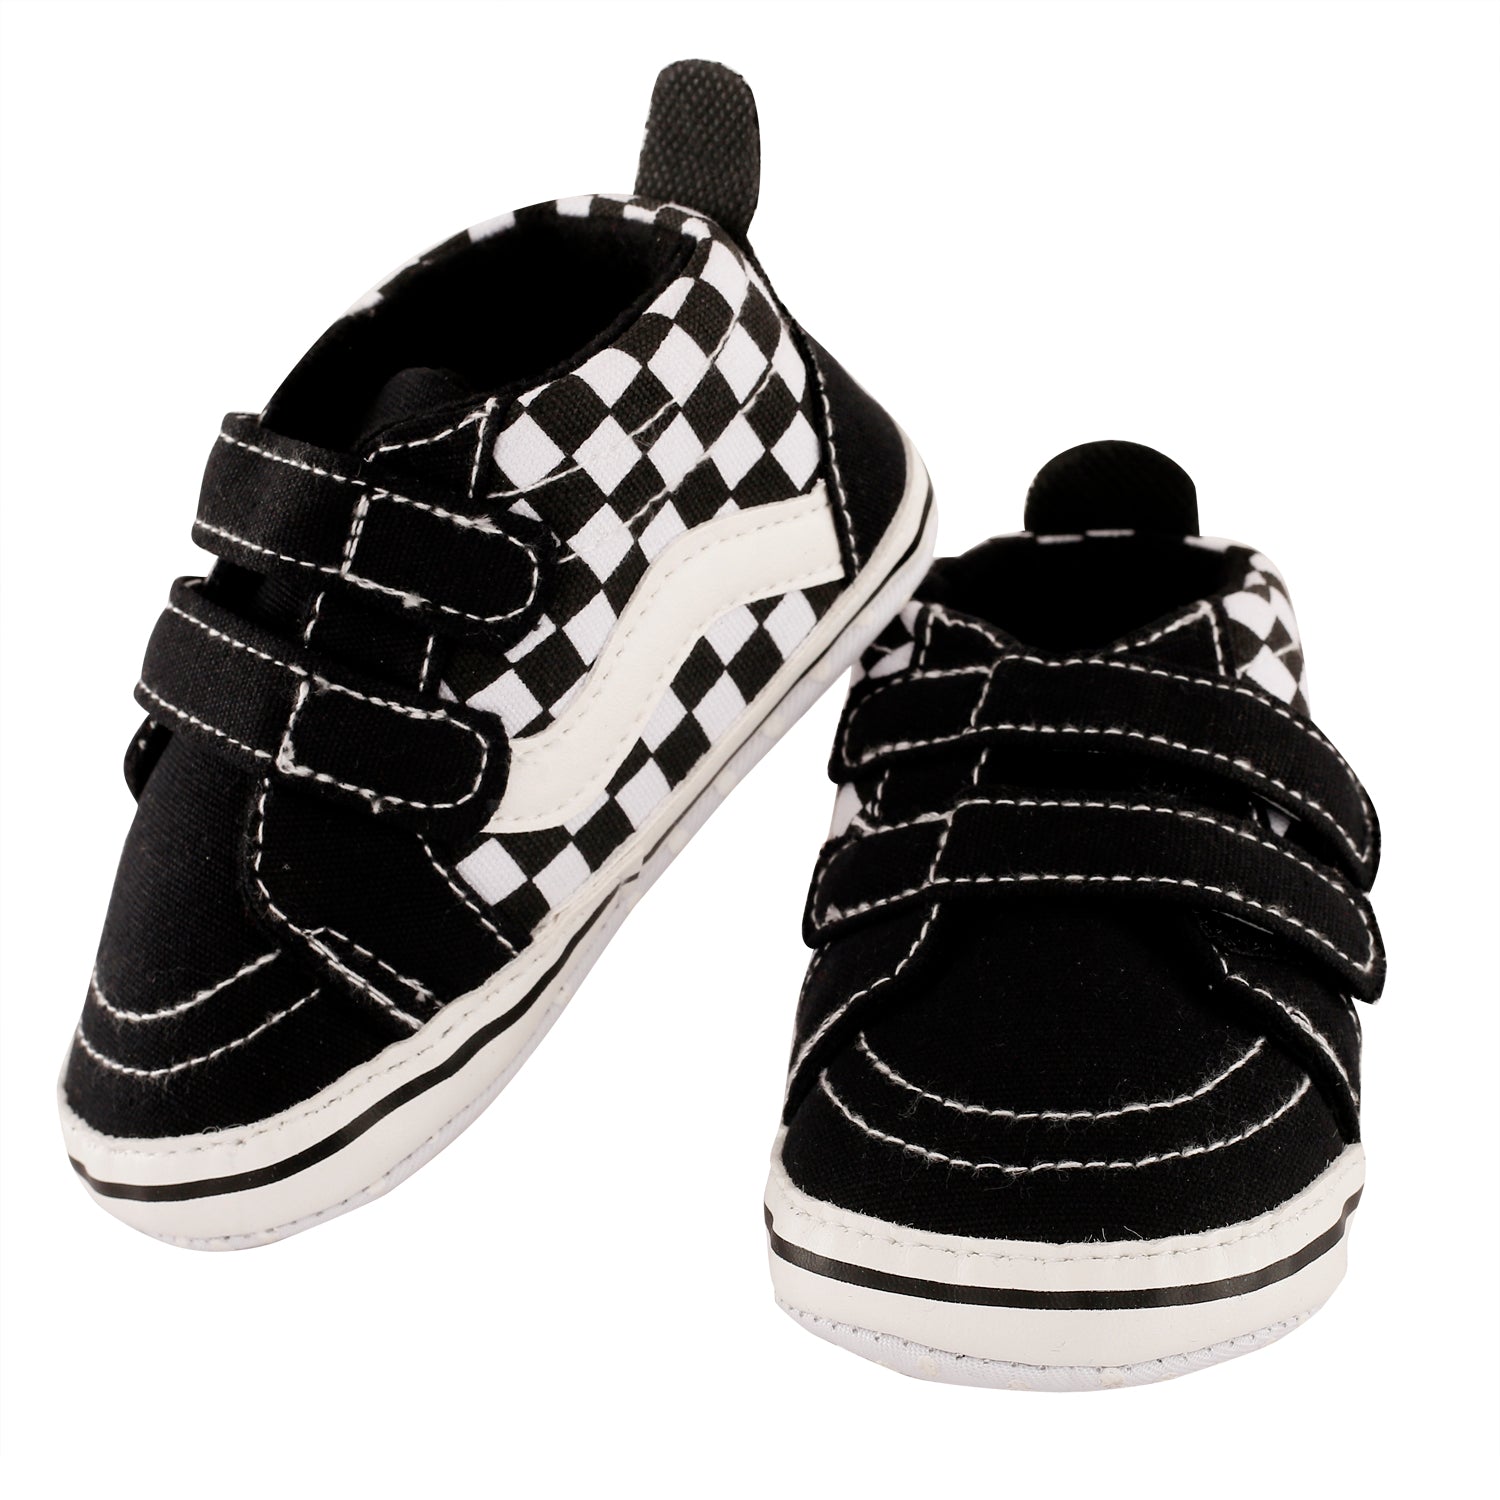 Chequered Black Casual Booties - Baby Moo